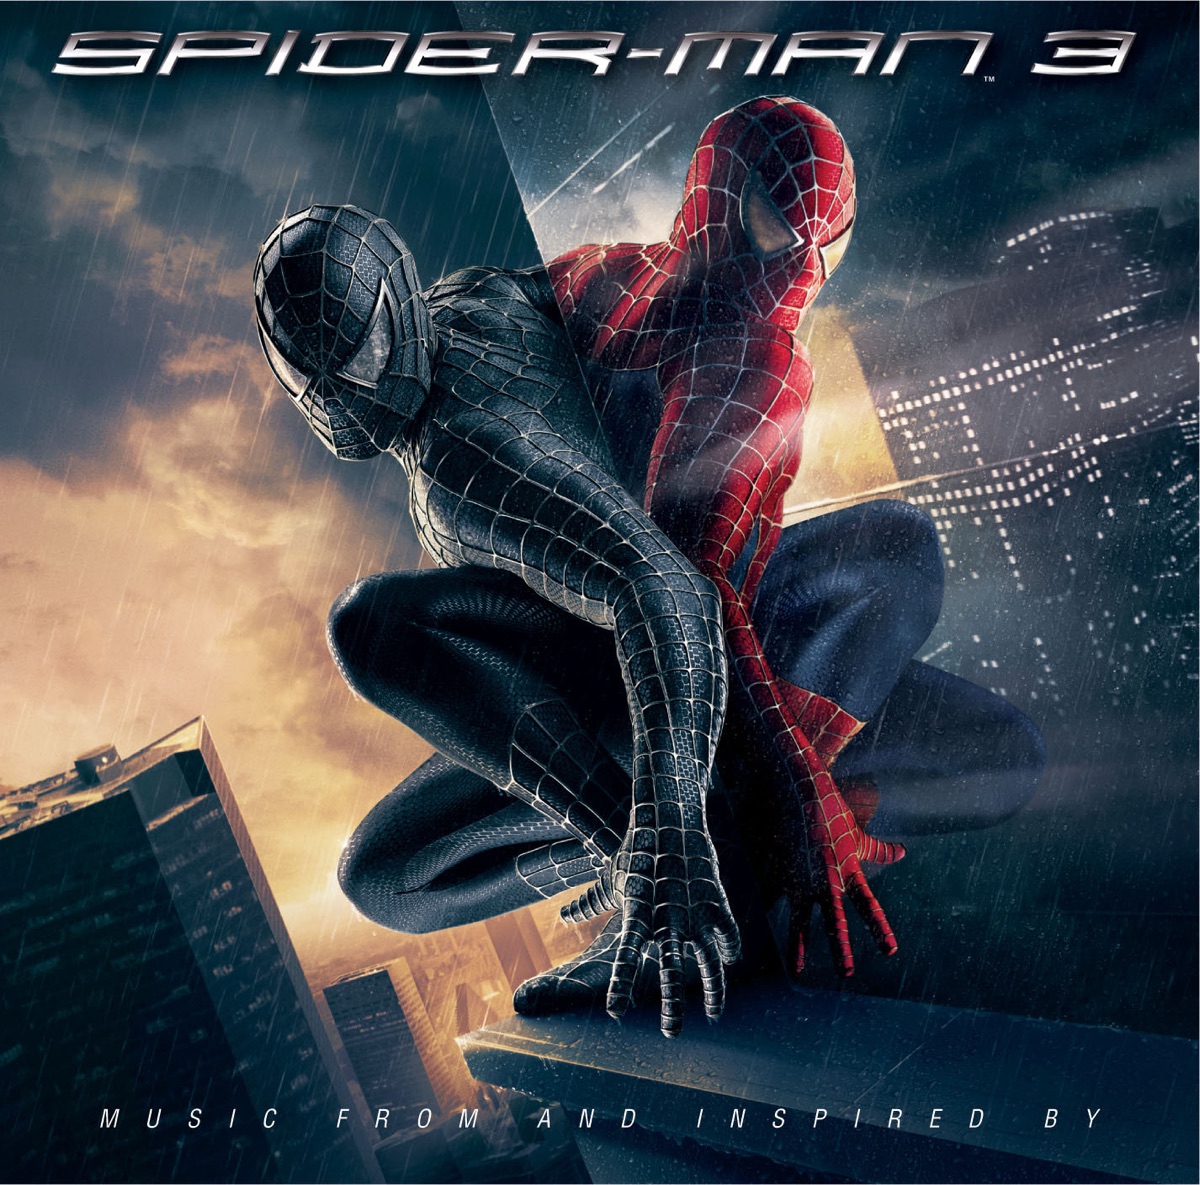 ‎Spider-Man 2 (Music from and Inspired By) by Various Artists on Apple Music